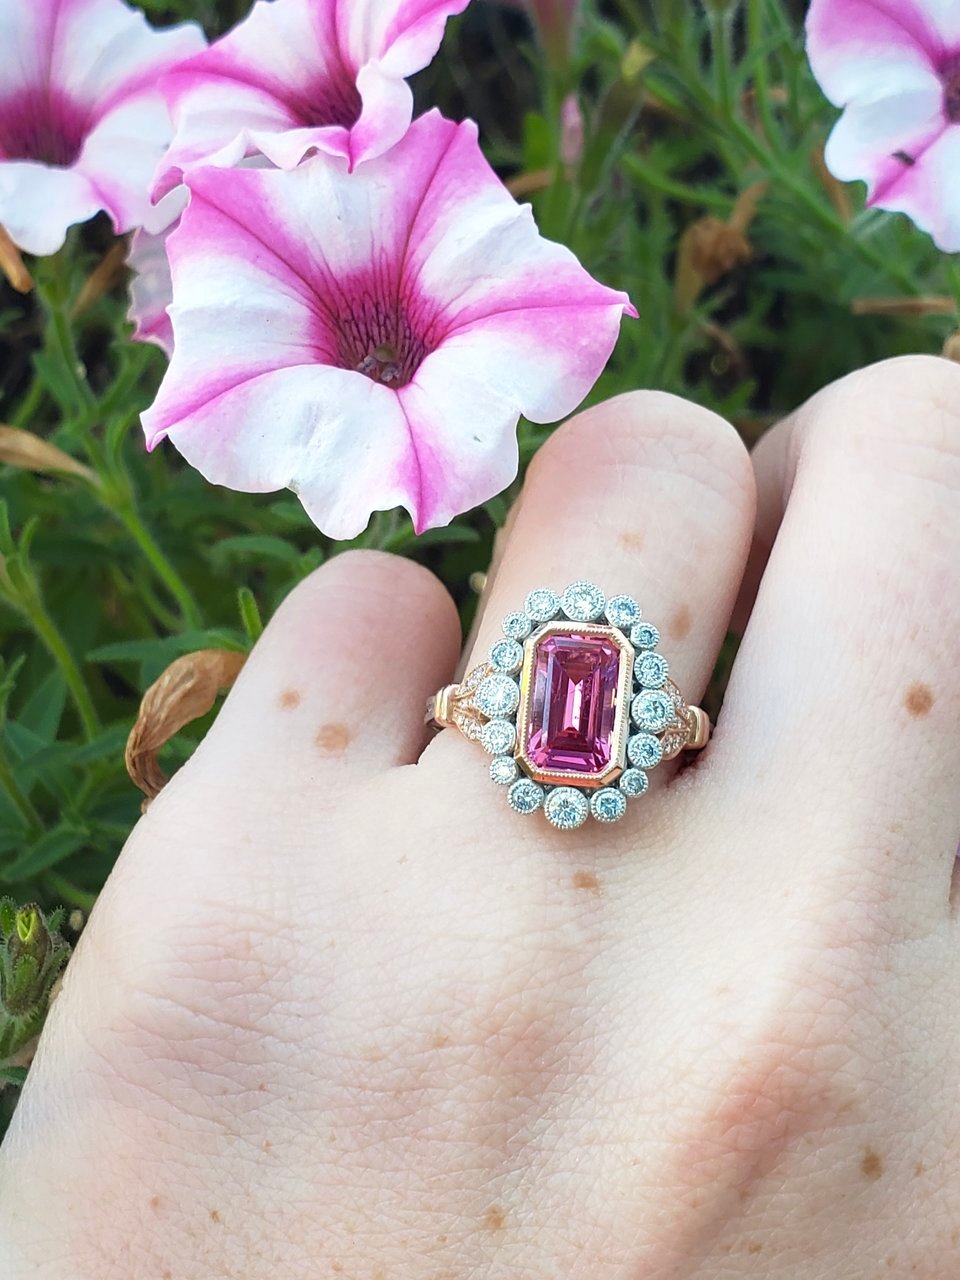 Elle_71125 posted this stunning deep pink Mahenge Spinel ring on the Show Me the Bling forum at PriceScope. This ring is TDF, that pink is off the charts! Everyone needs a pop of color in their lives!